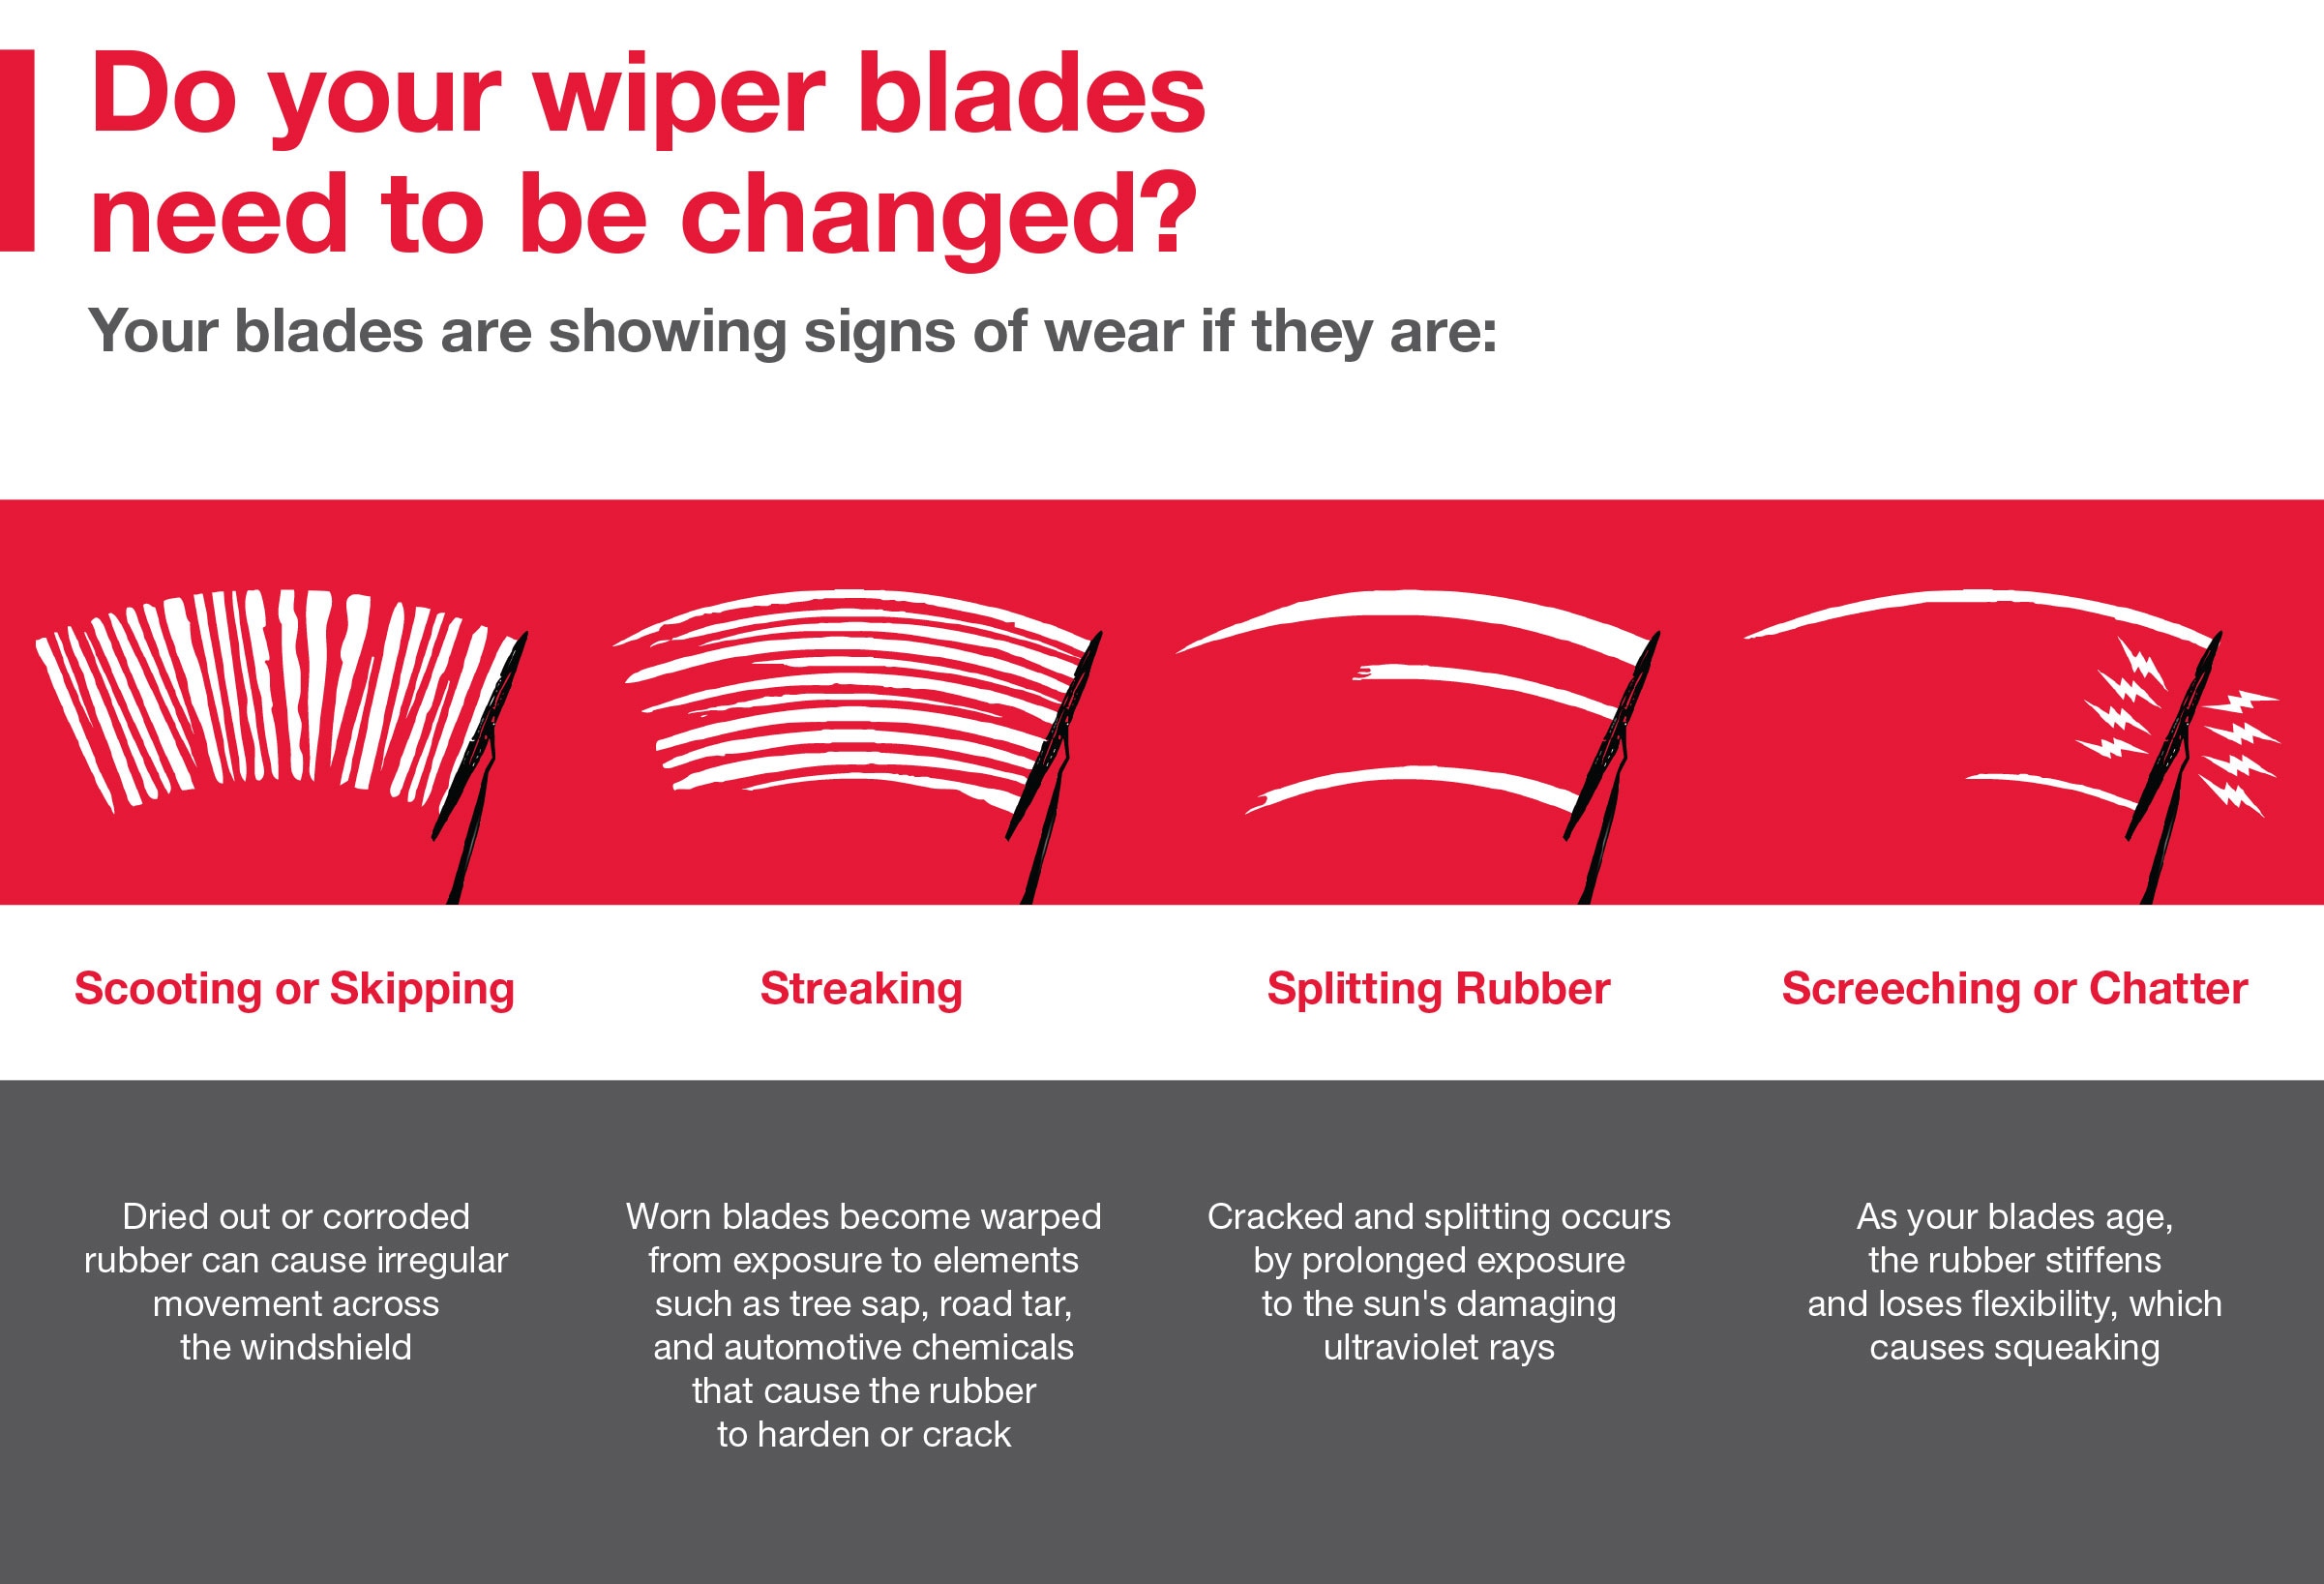 Do your wiper blades need to be changed? Call your local dealer for more info.